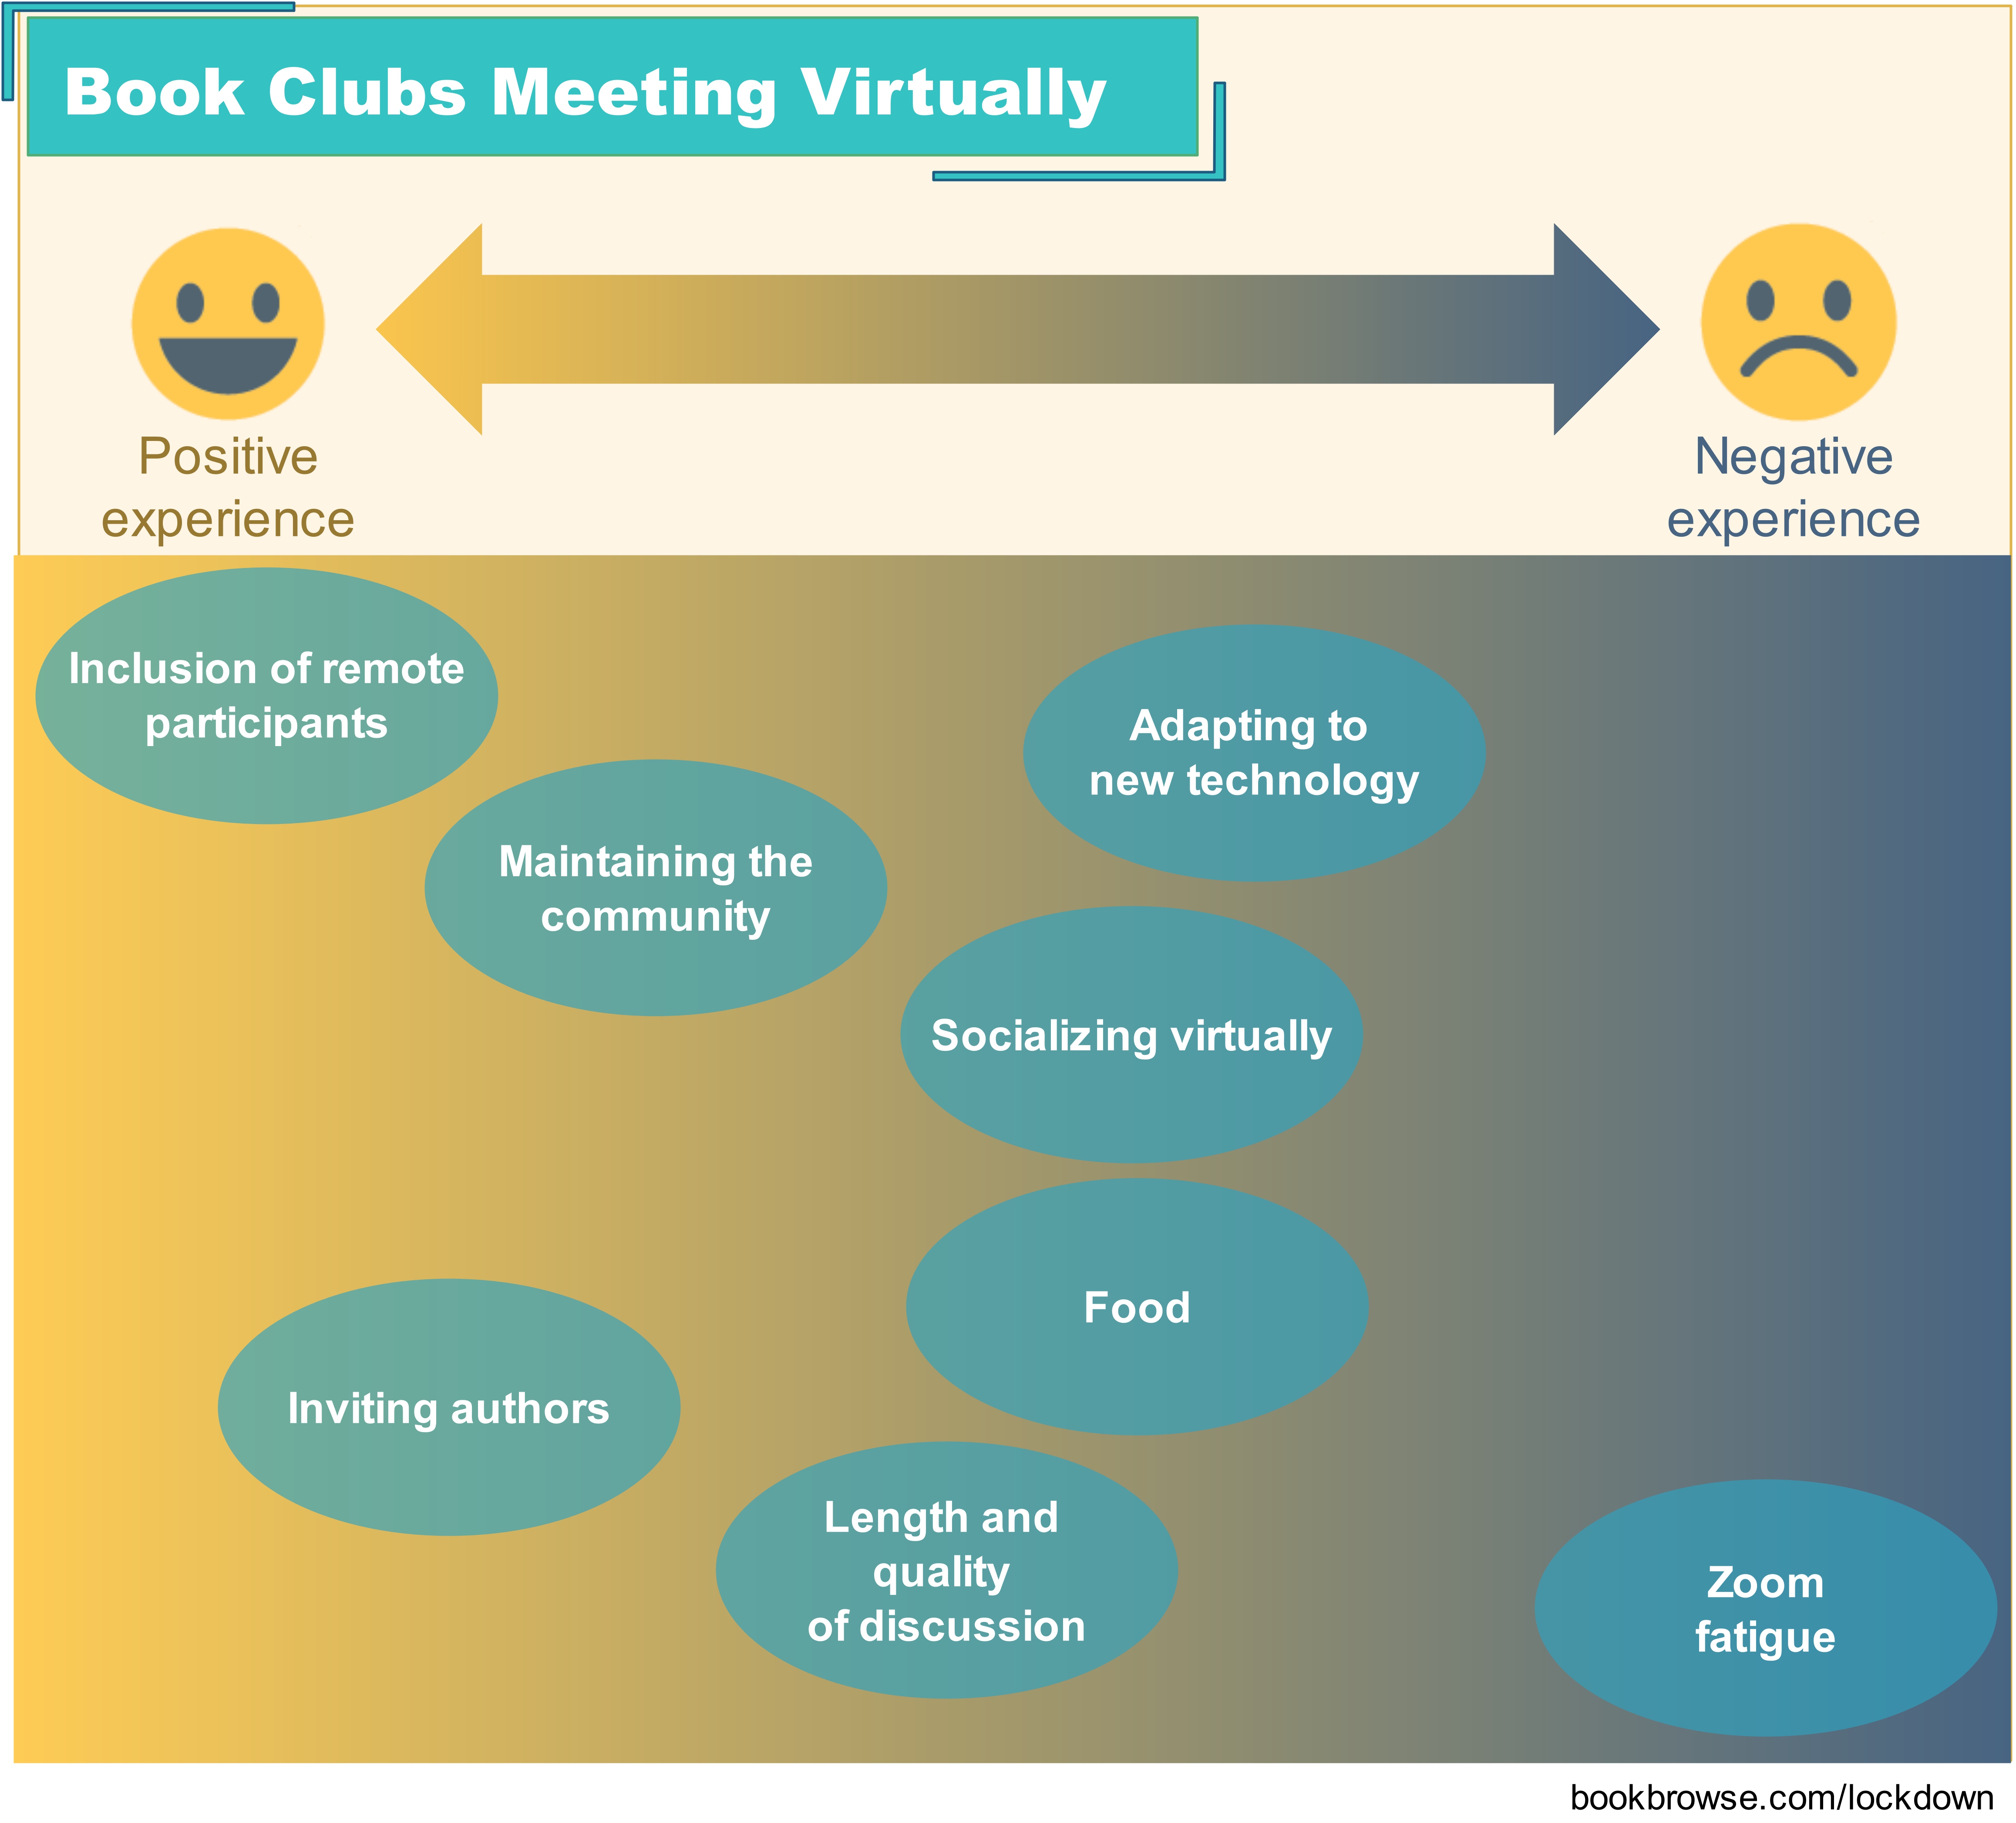 book clubs meeting virtually, the pros and cons